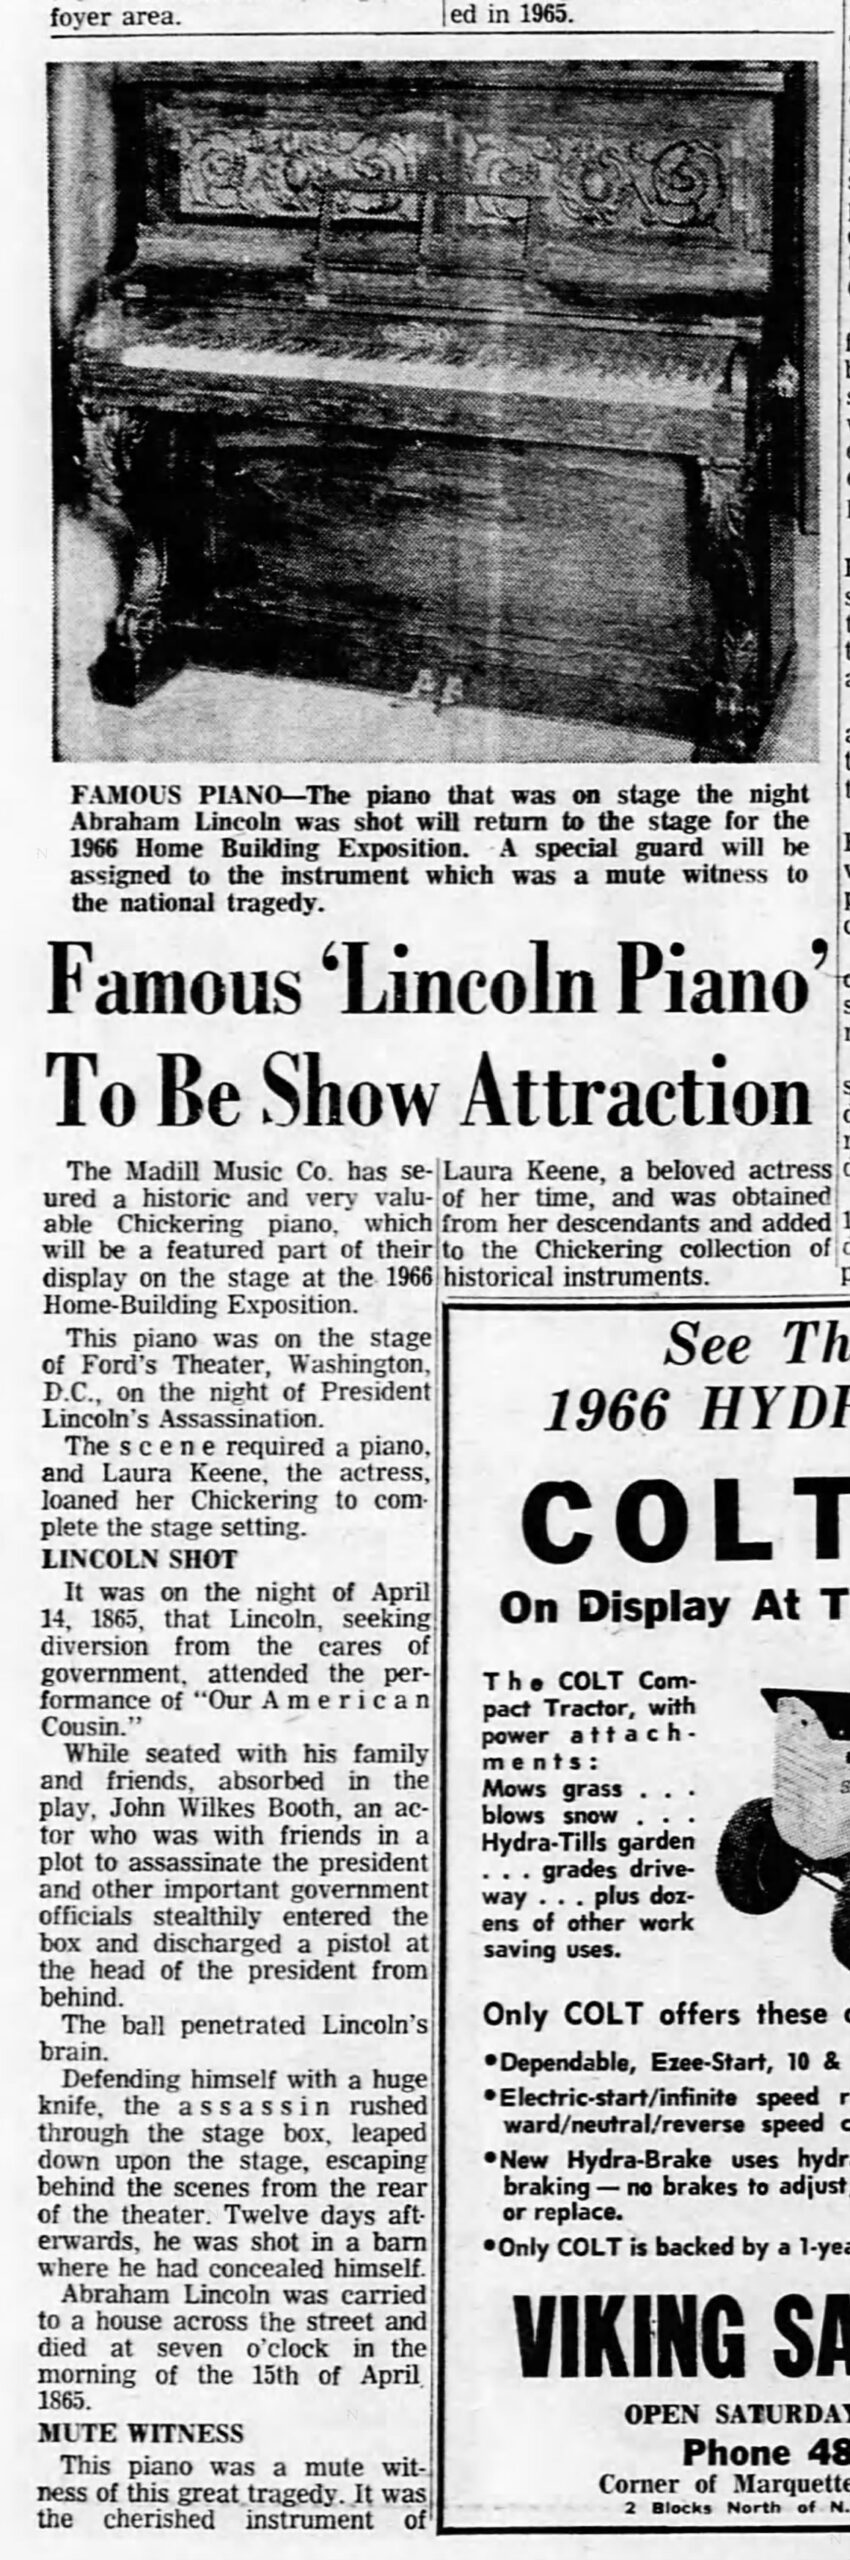 An account from the Lansing State Journal, February 22, 1966